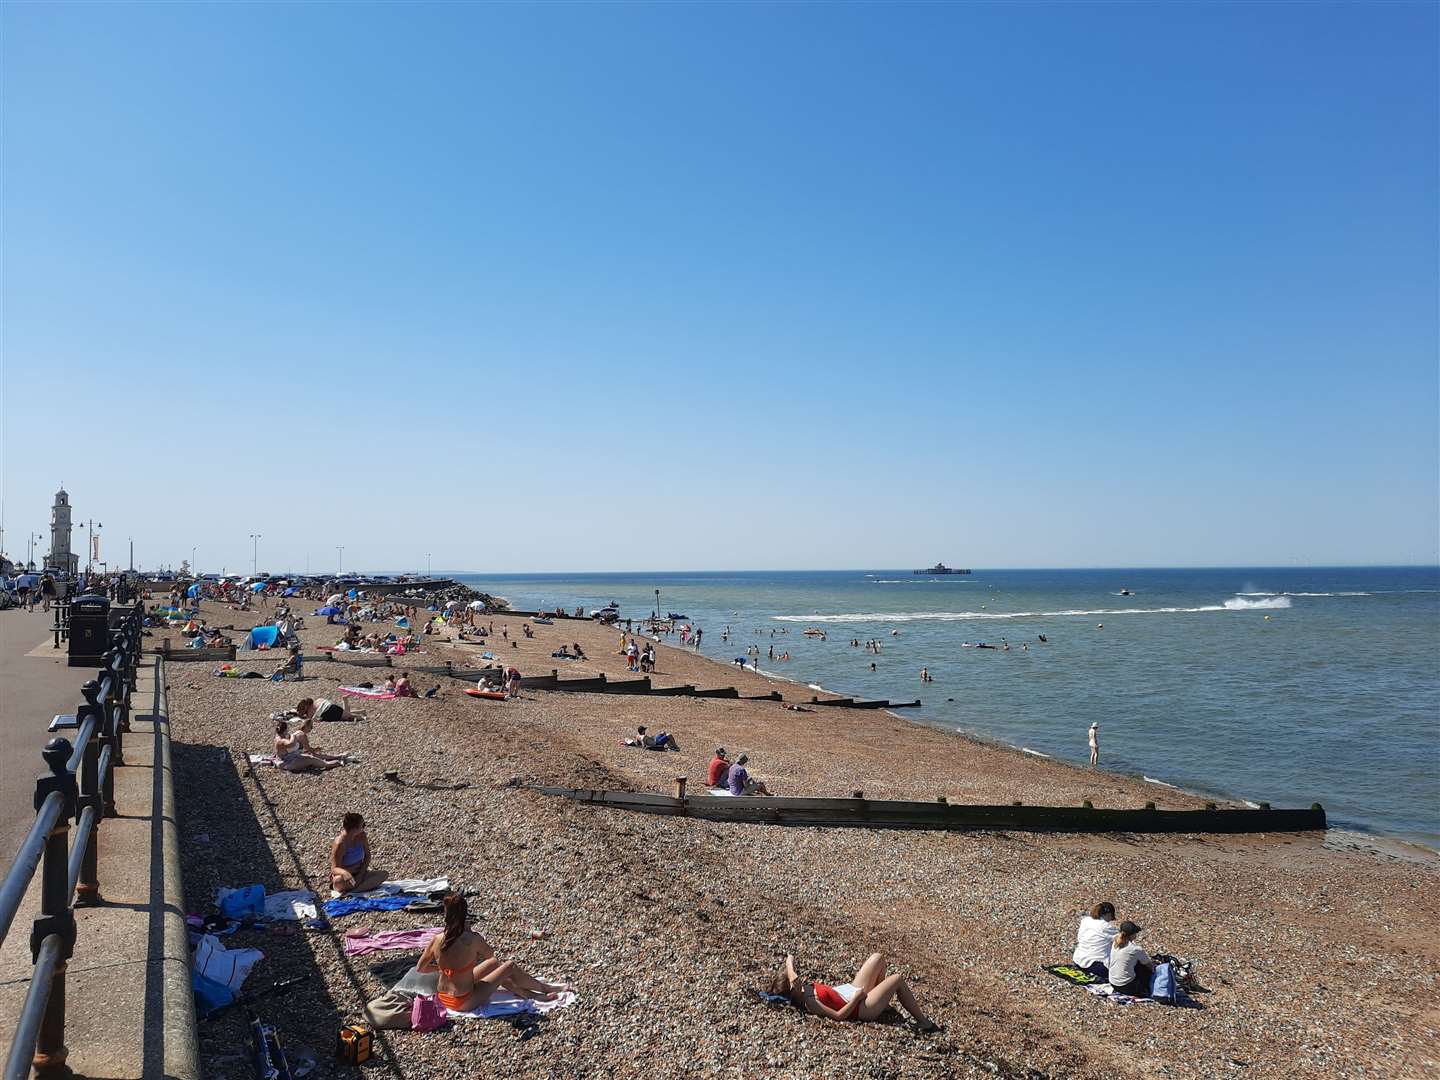 Crowds have turned out to enjoy the sun on Herne Bay's beach (39601050)